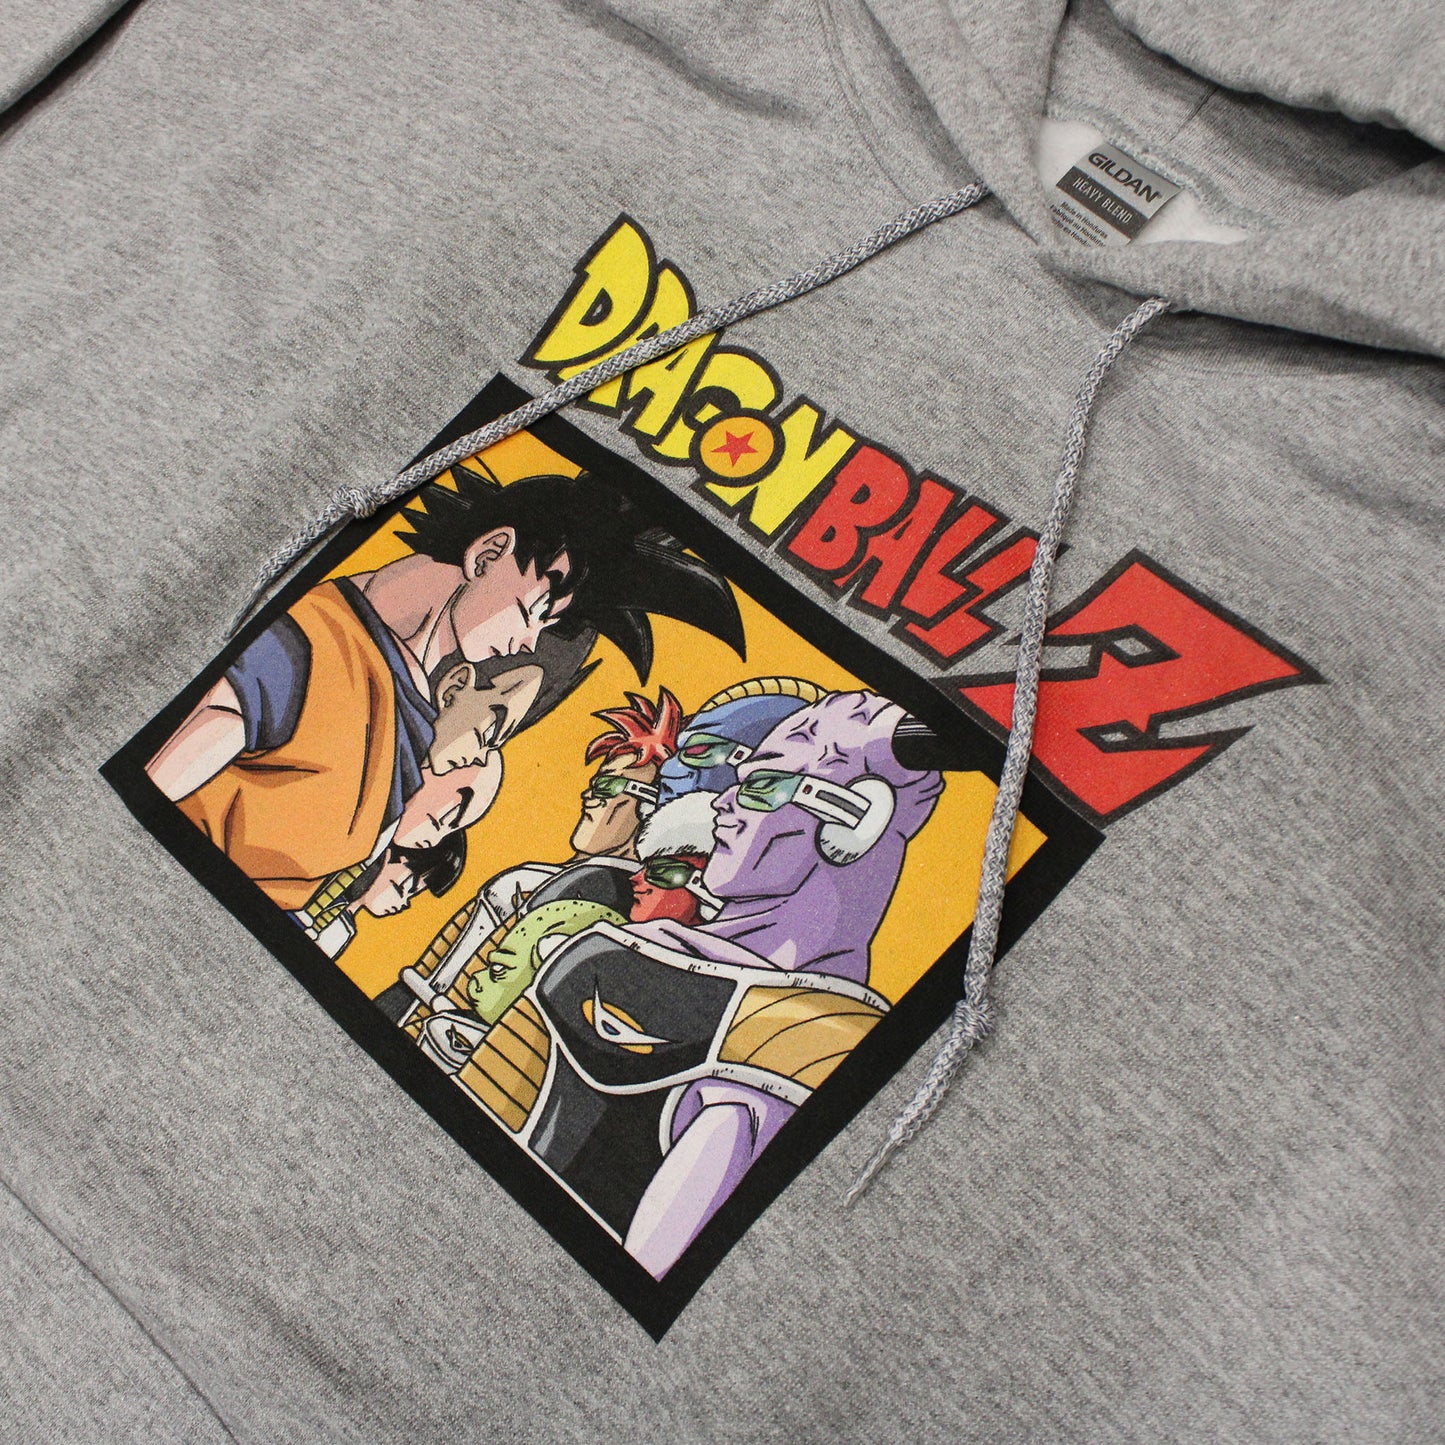 Heroes and Villains (Dragon Ball Z) Pullover Hoodie Sweatshirt